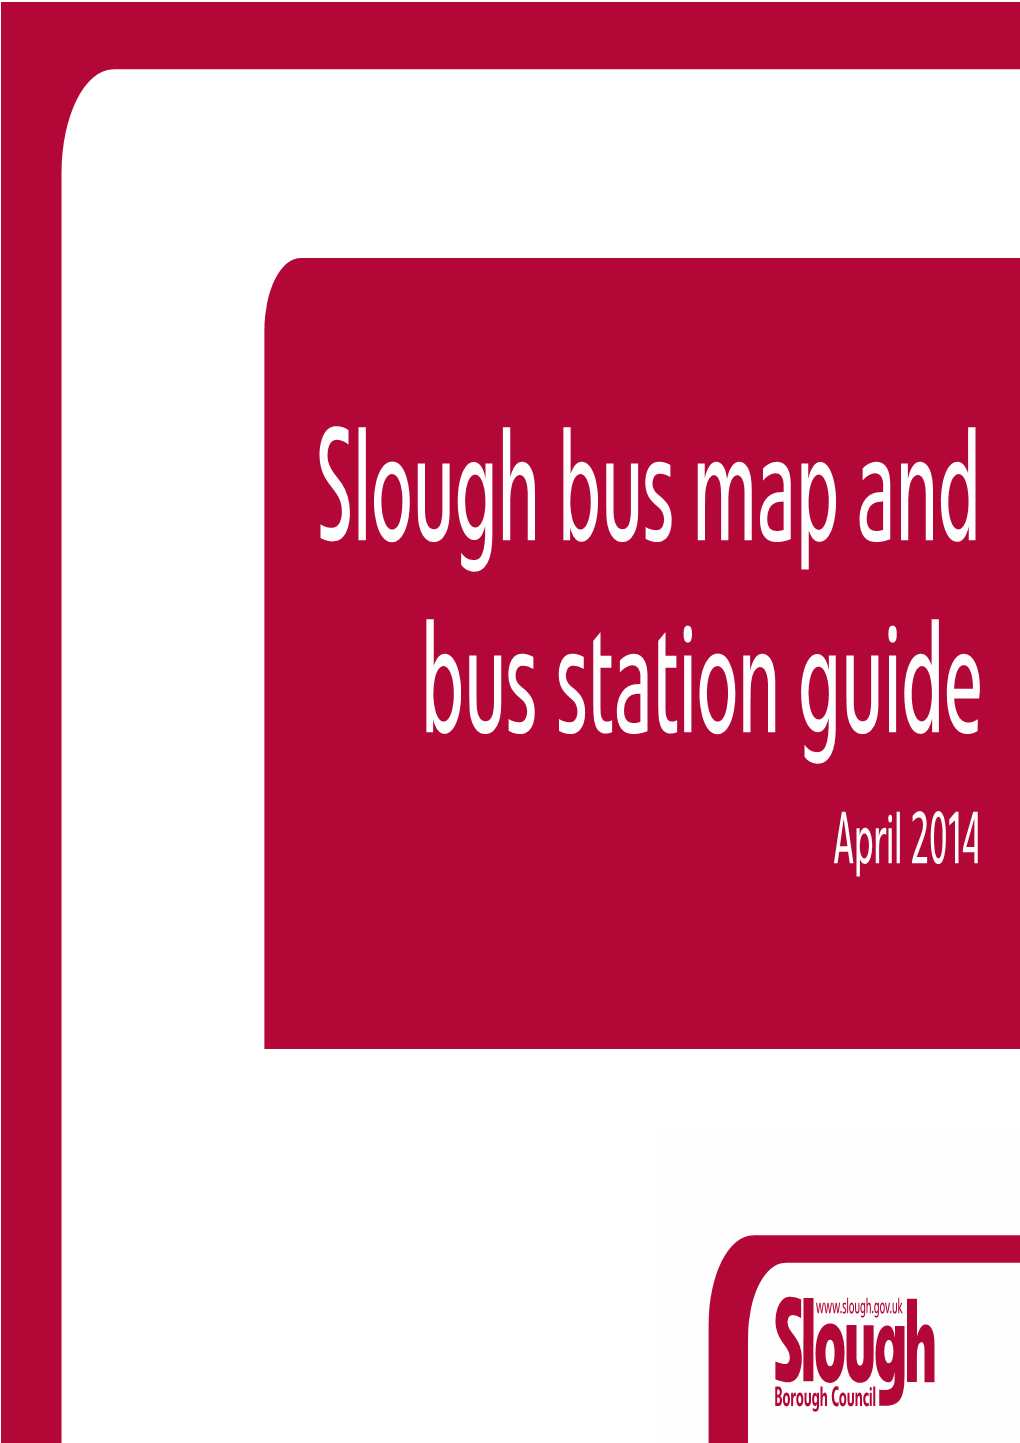 Slough Bus Map and Bus Station Guide April 2014 Slough Bus Station Use Yellow Areas ONLY to Access Bus Stops